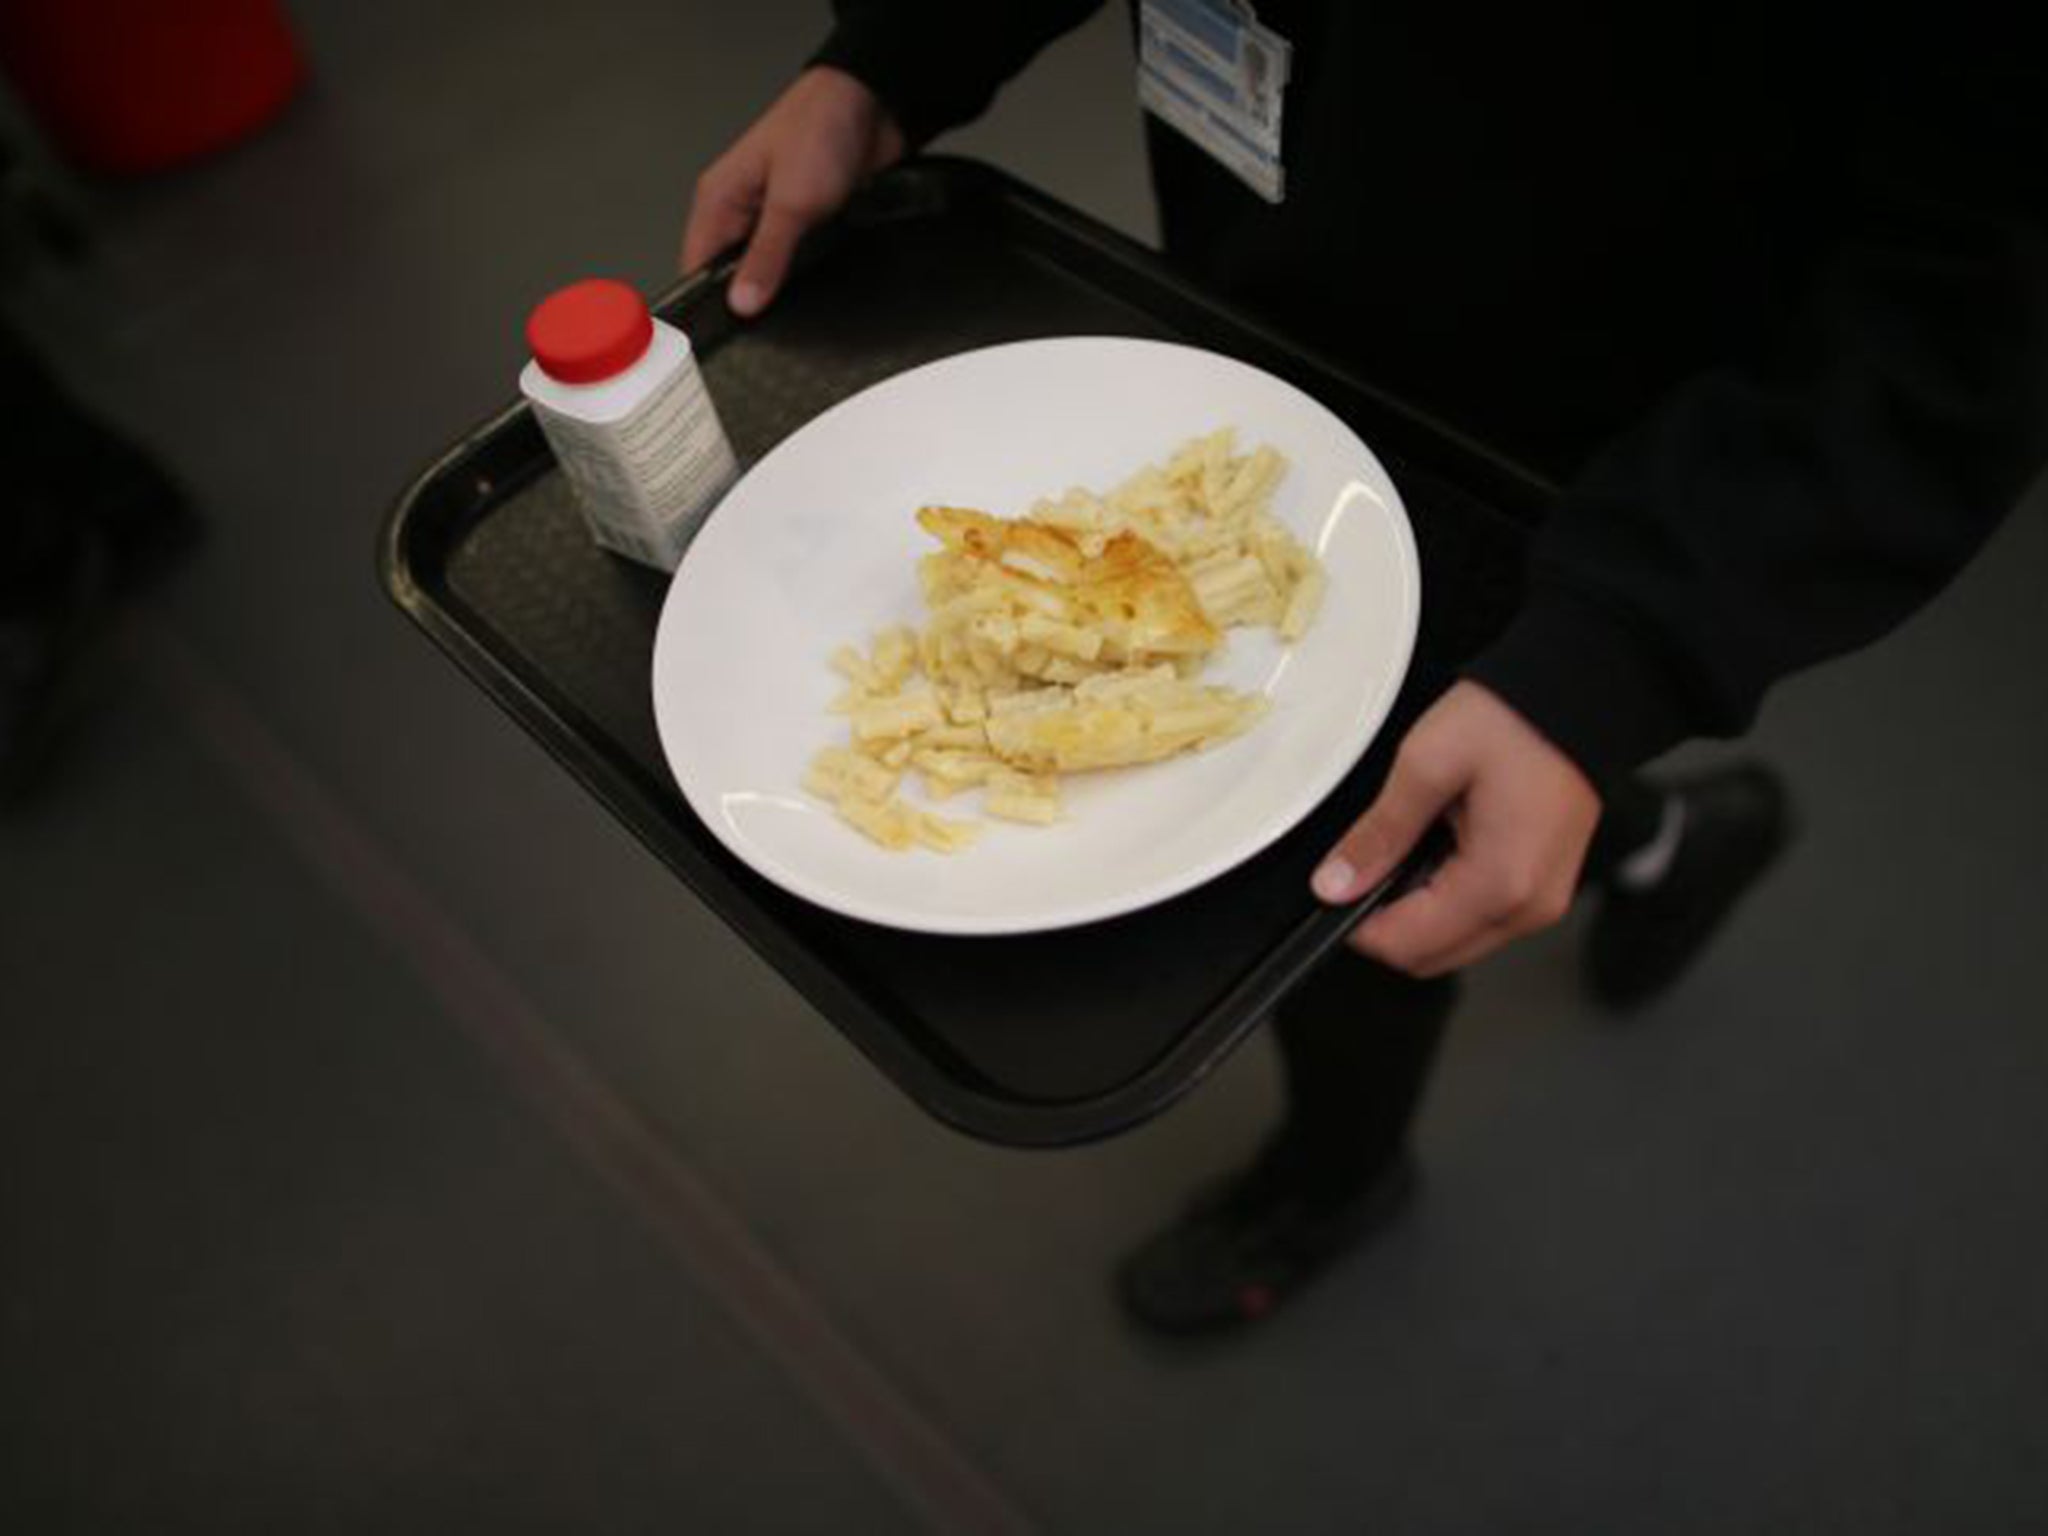 The Universal Infant Free School Meals policy costs £600m a year, and there are claims it is eating into the core education budget